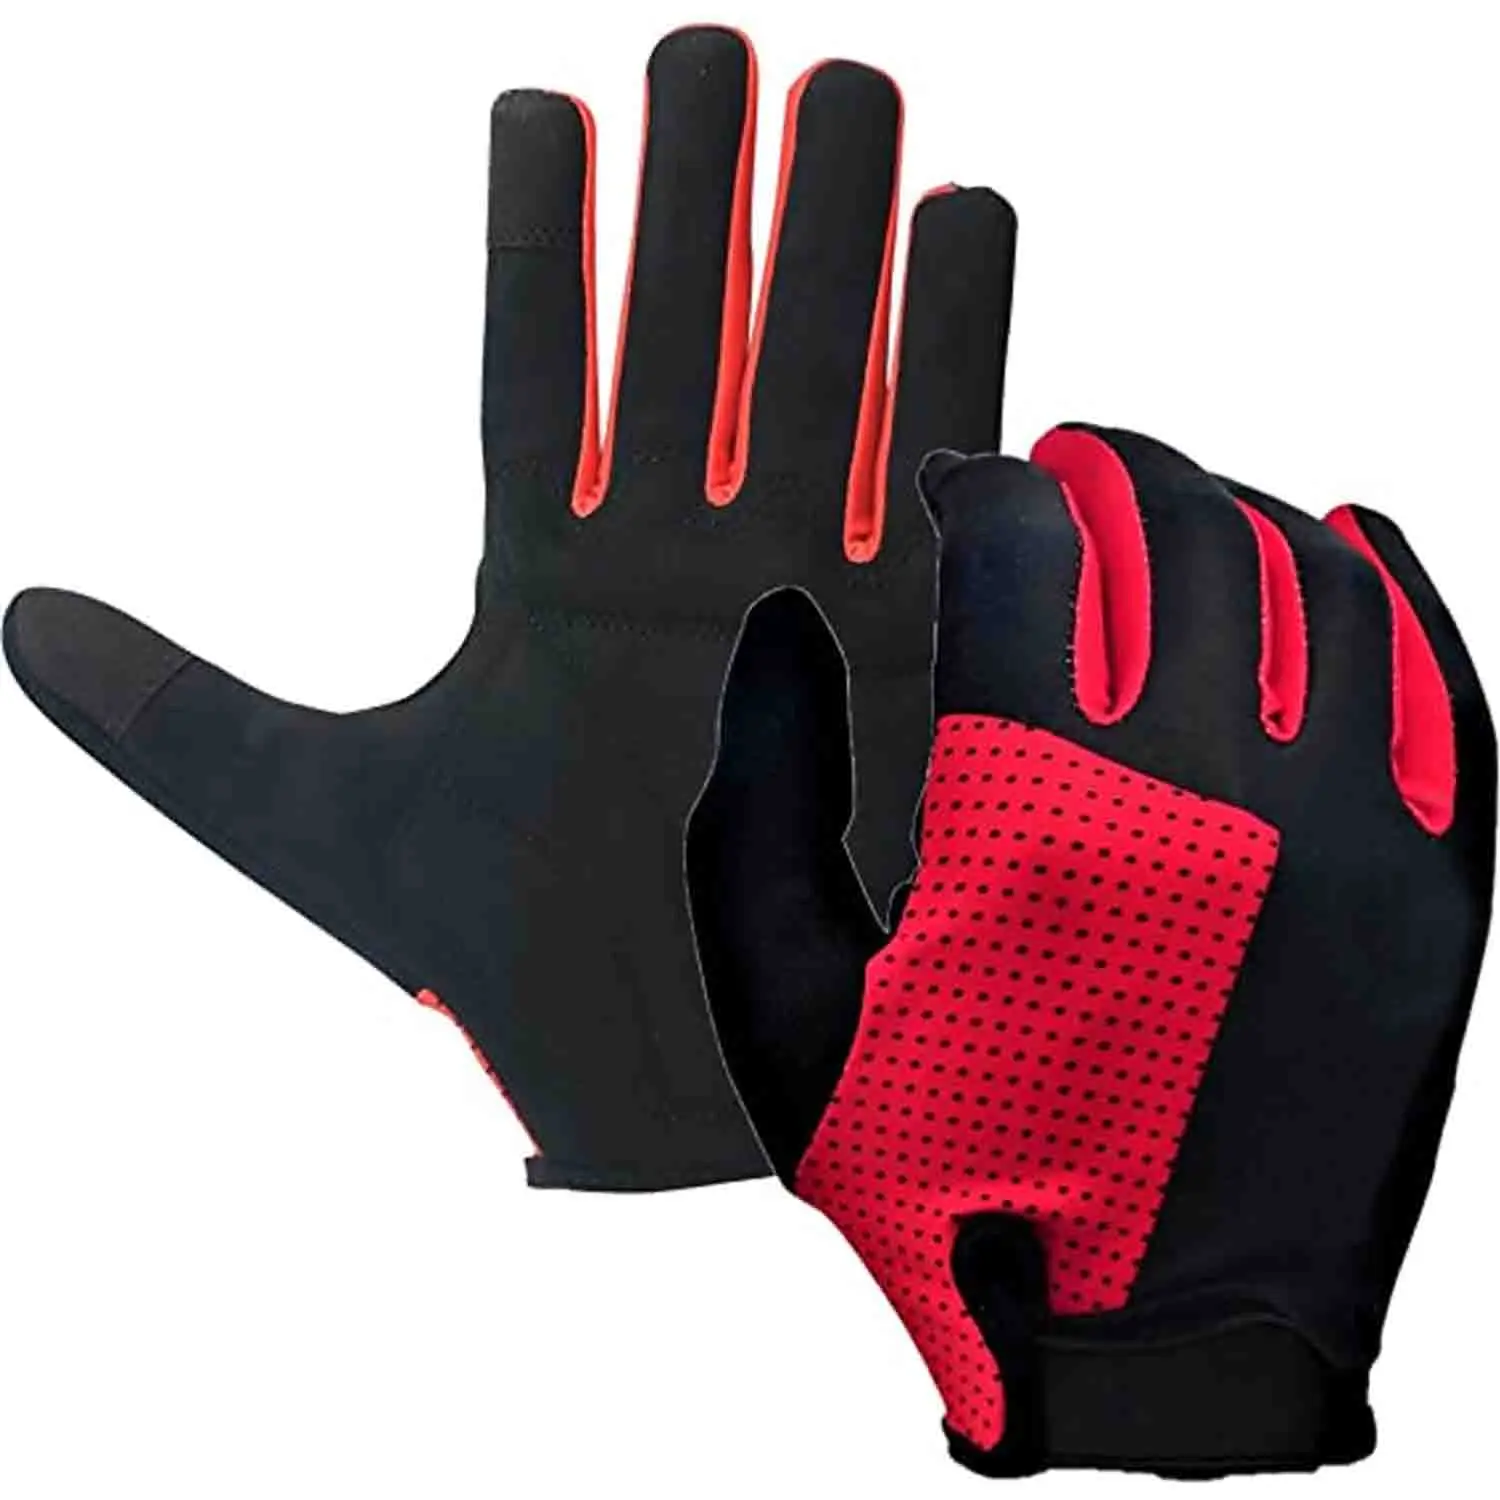 leather cycling gloves fingerless